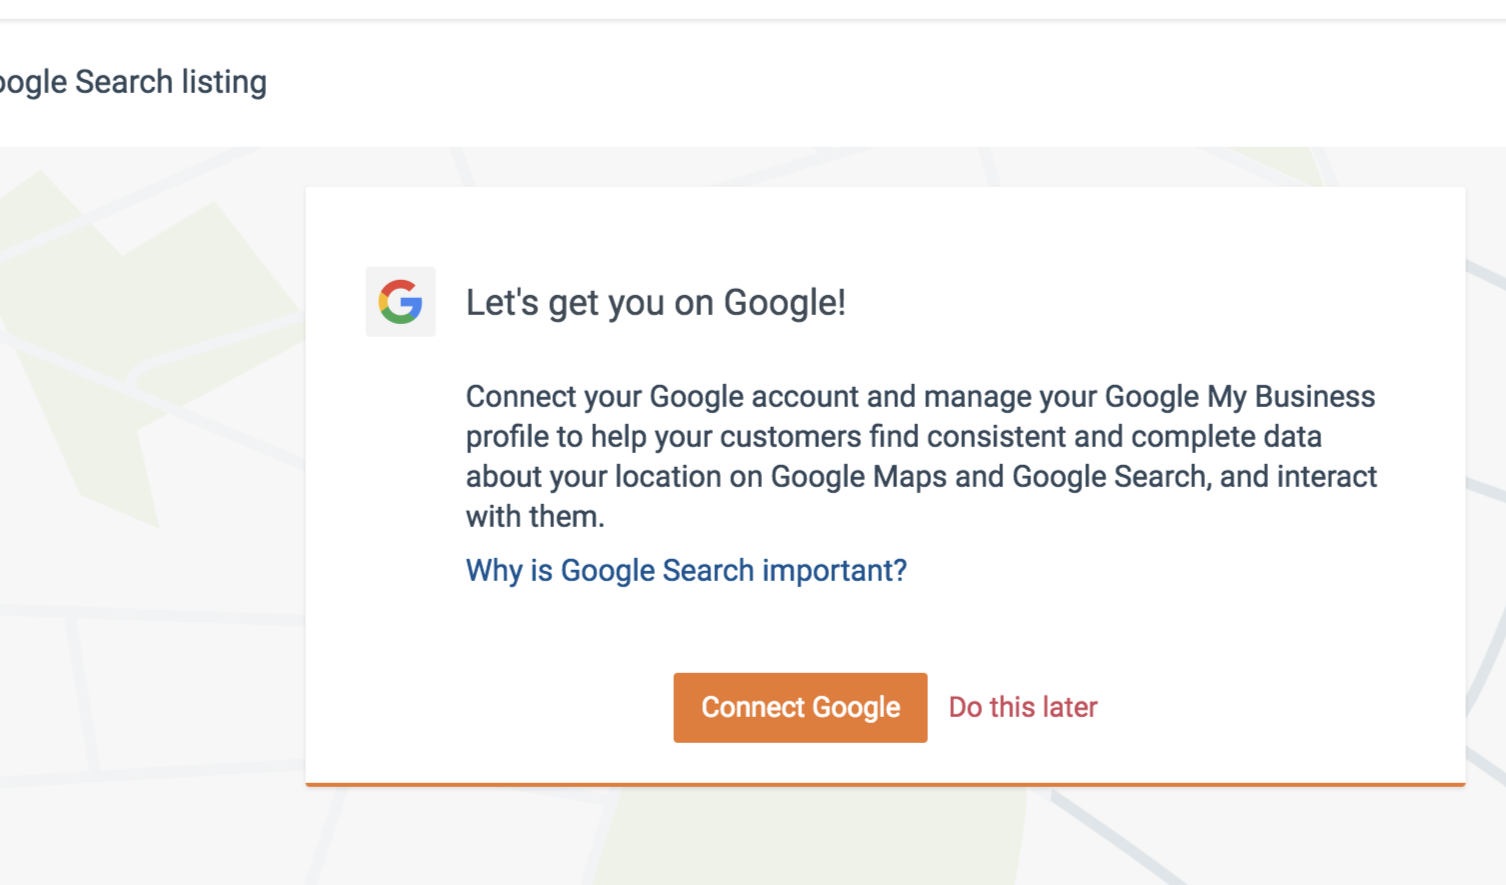 Display of the Button link to connect your business listing to Google